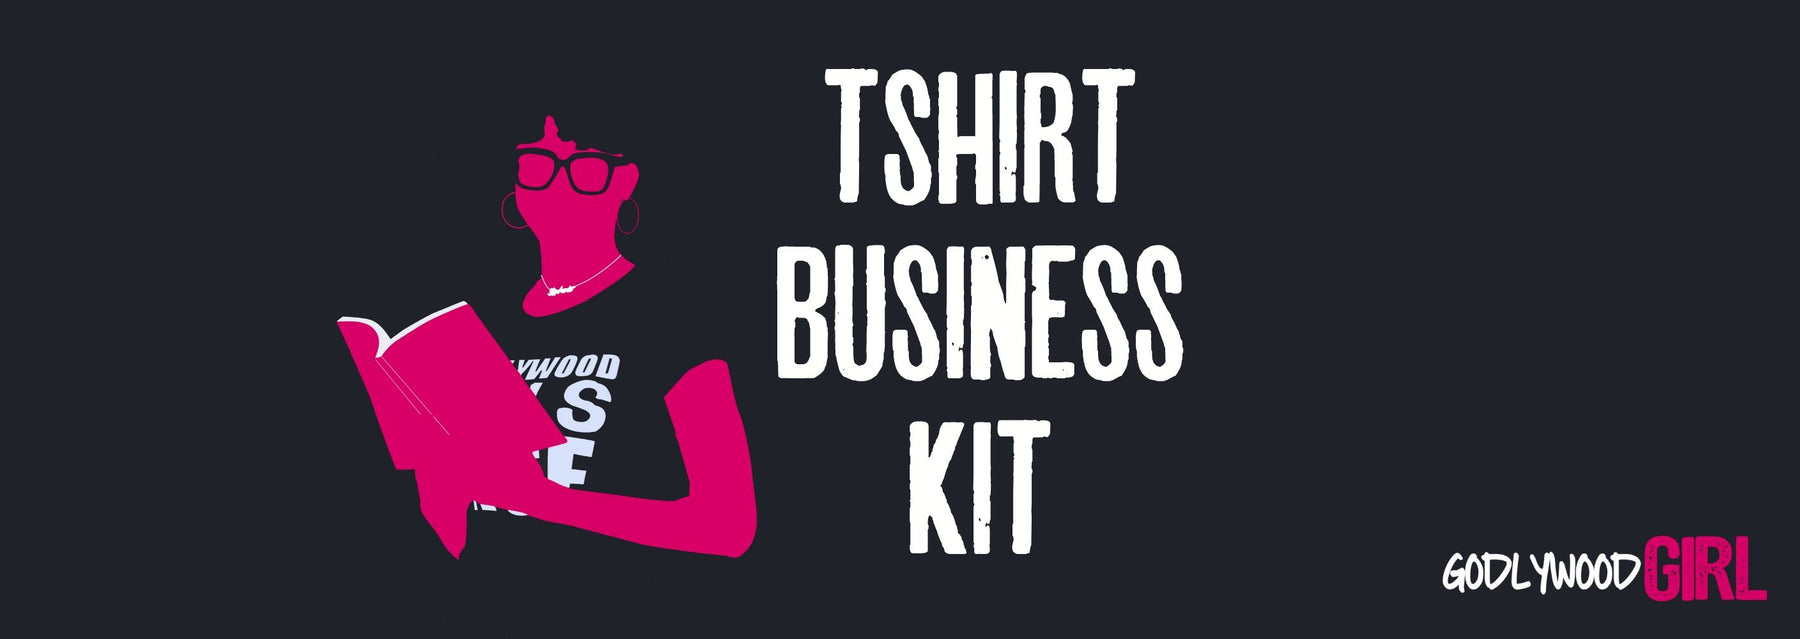 T SHIRT BUSINESS STARTER KIT (Start A T shirt Business: All The Equipment I Started Out With)